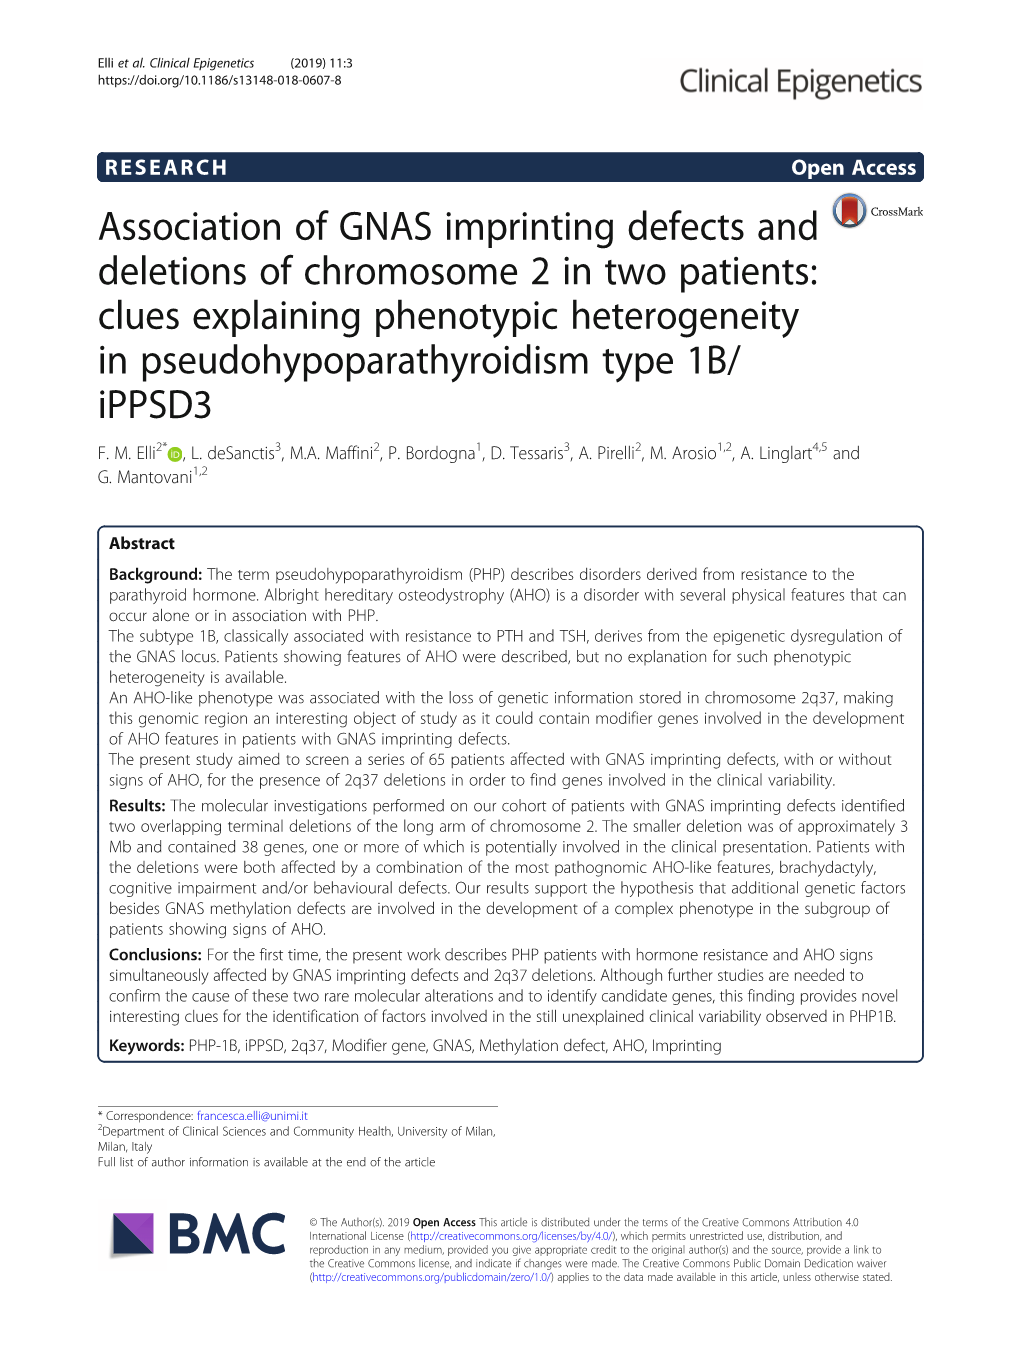 Association of GNAS Imprinting Defects and Deletions of Chromosome 2 in Two Patients